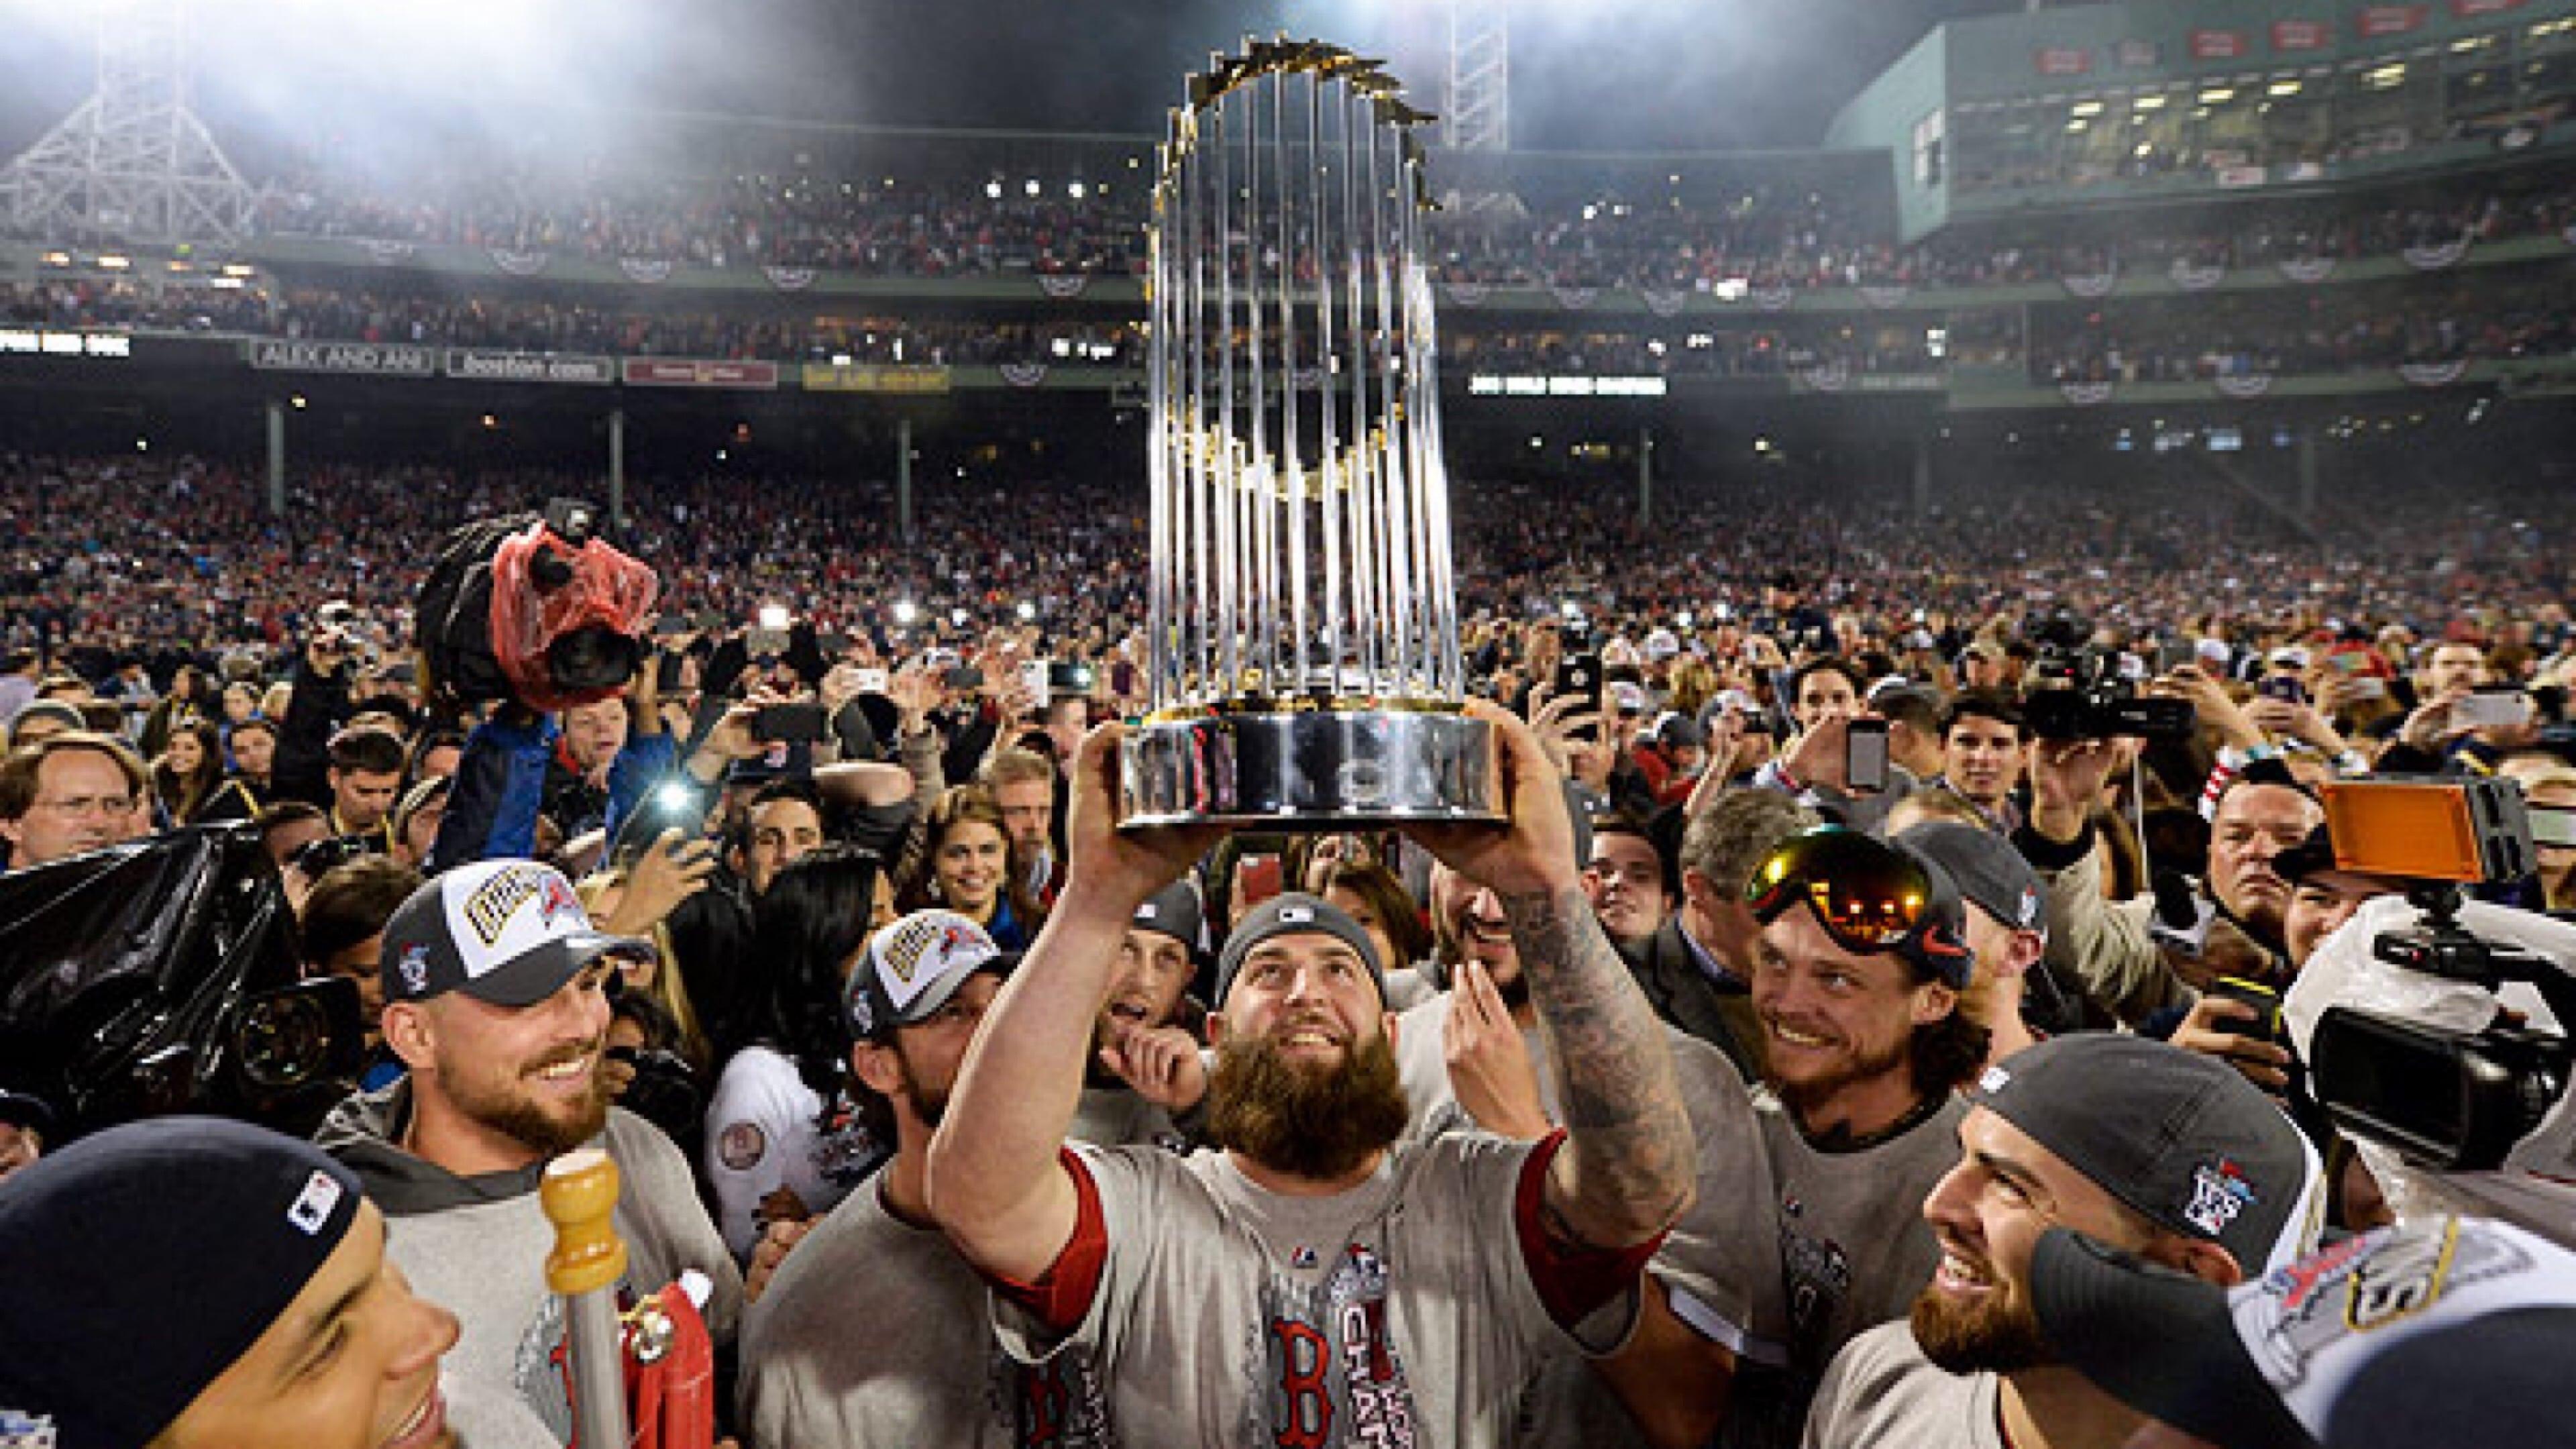 Band of Bearded Brothers: The 2013 World Champion Red Sox backdrop